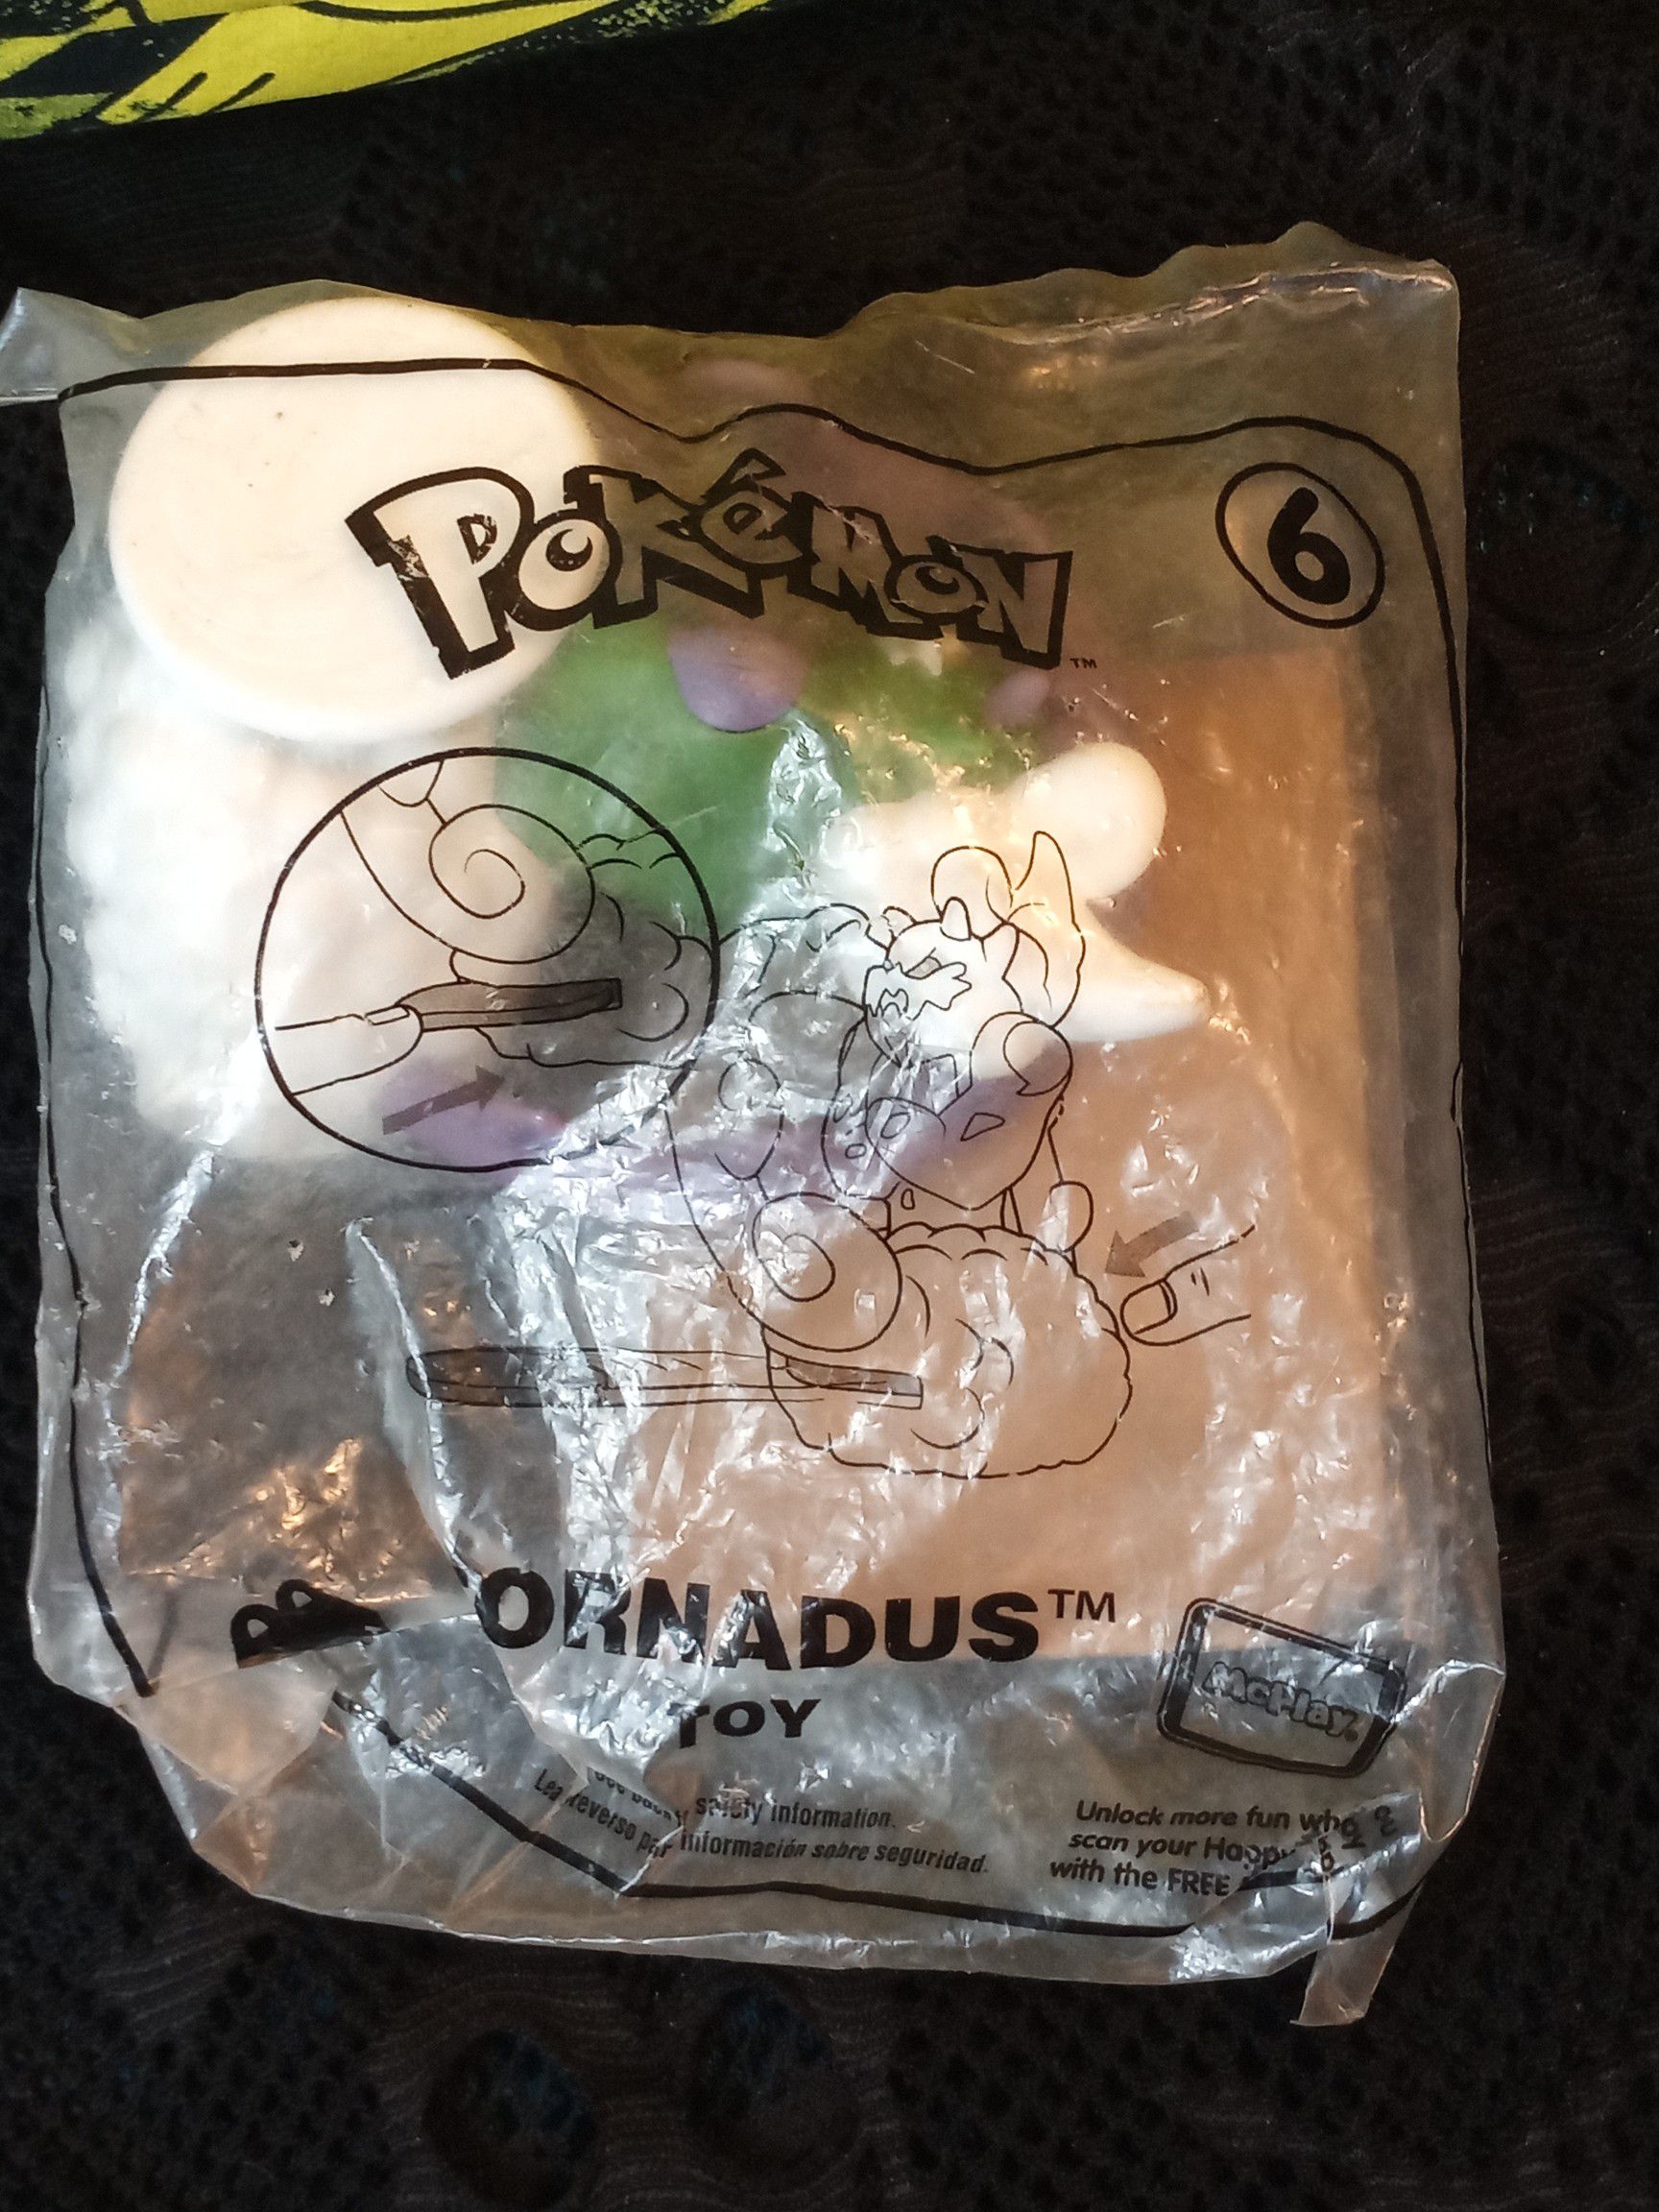 Pokemon tornadus collectable happy meal toy number 6 comes with a Pokemon card also